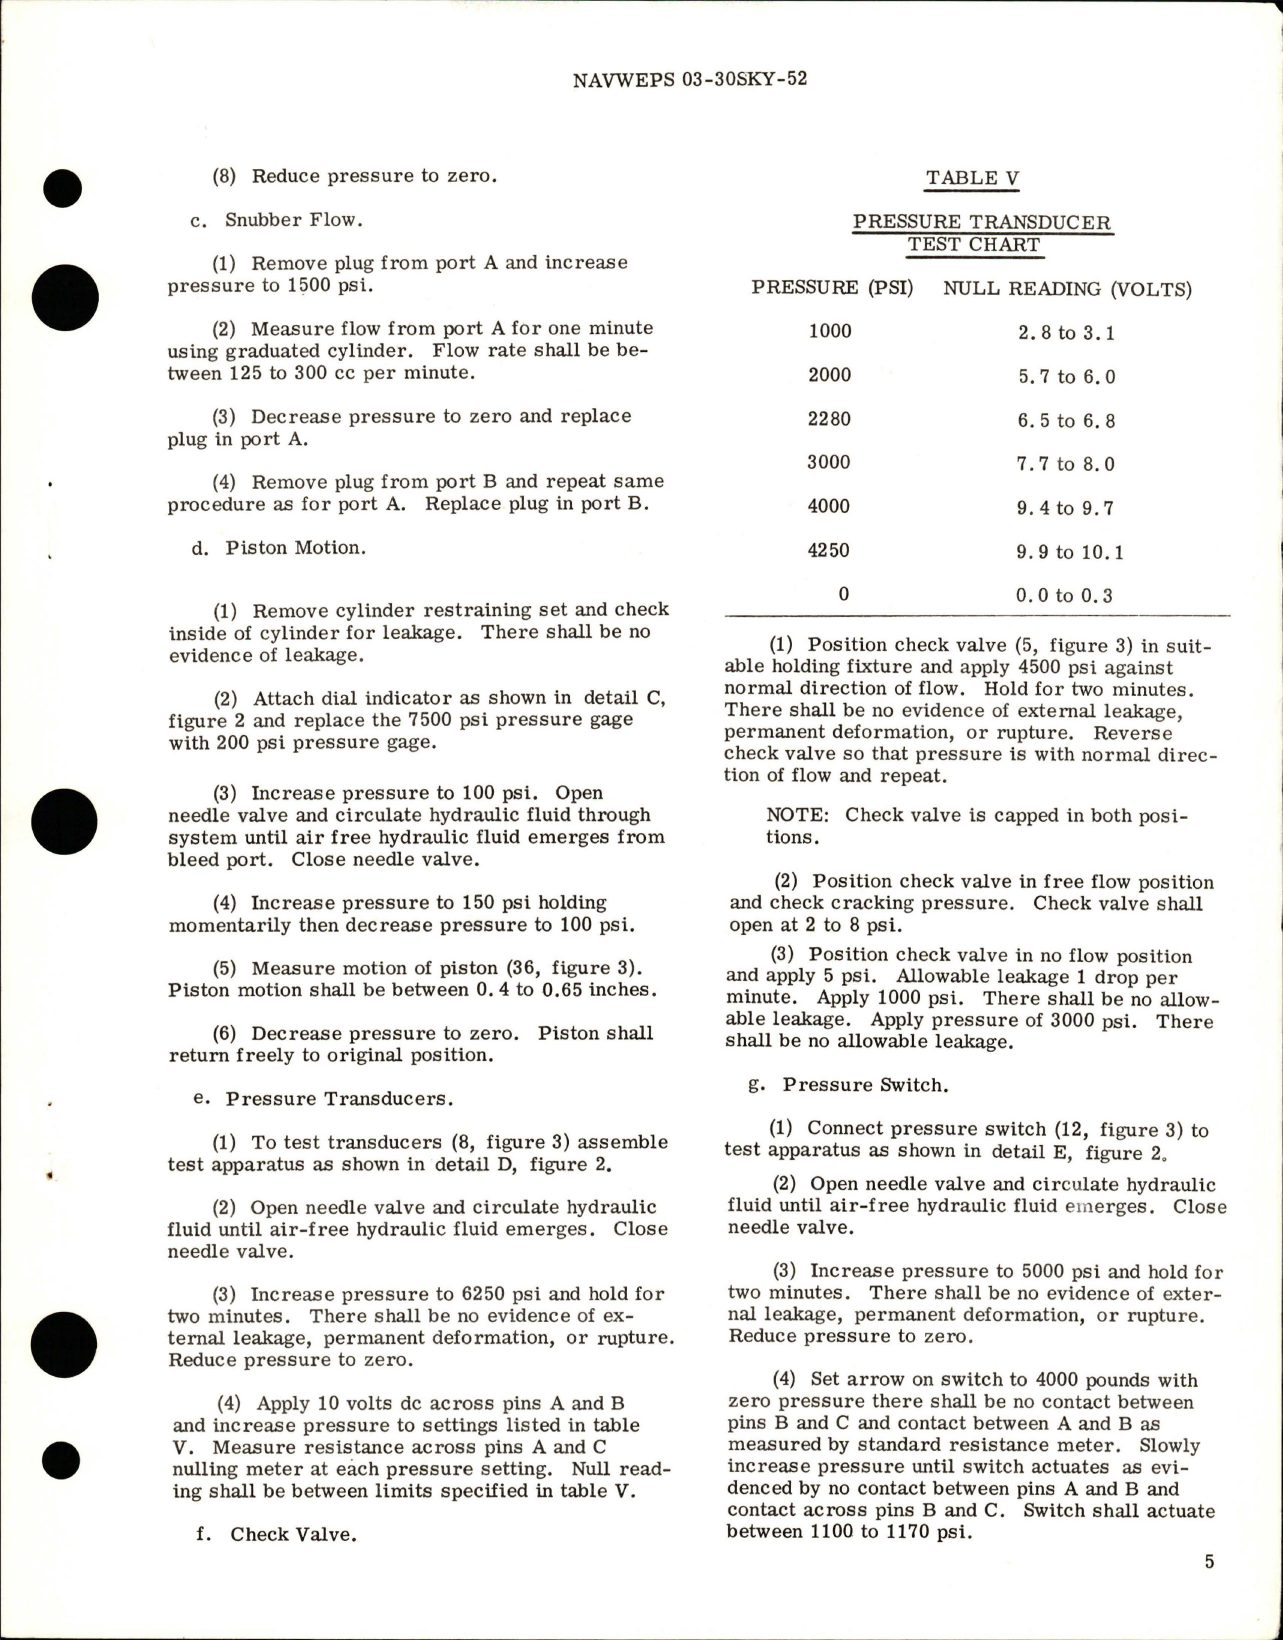 Sample page 5 from AirCorps Library document: Overhaul Instructions with Parts for Sensing Cylinder Assembly - S6168-64110-041